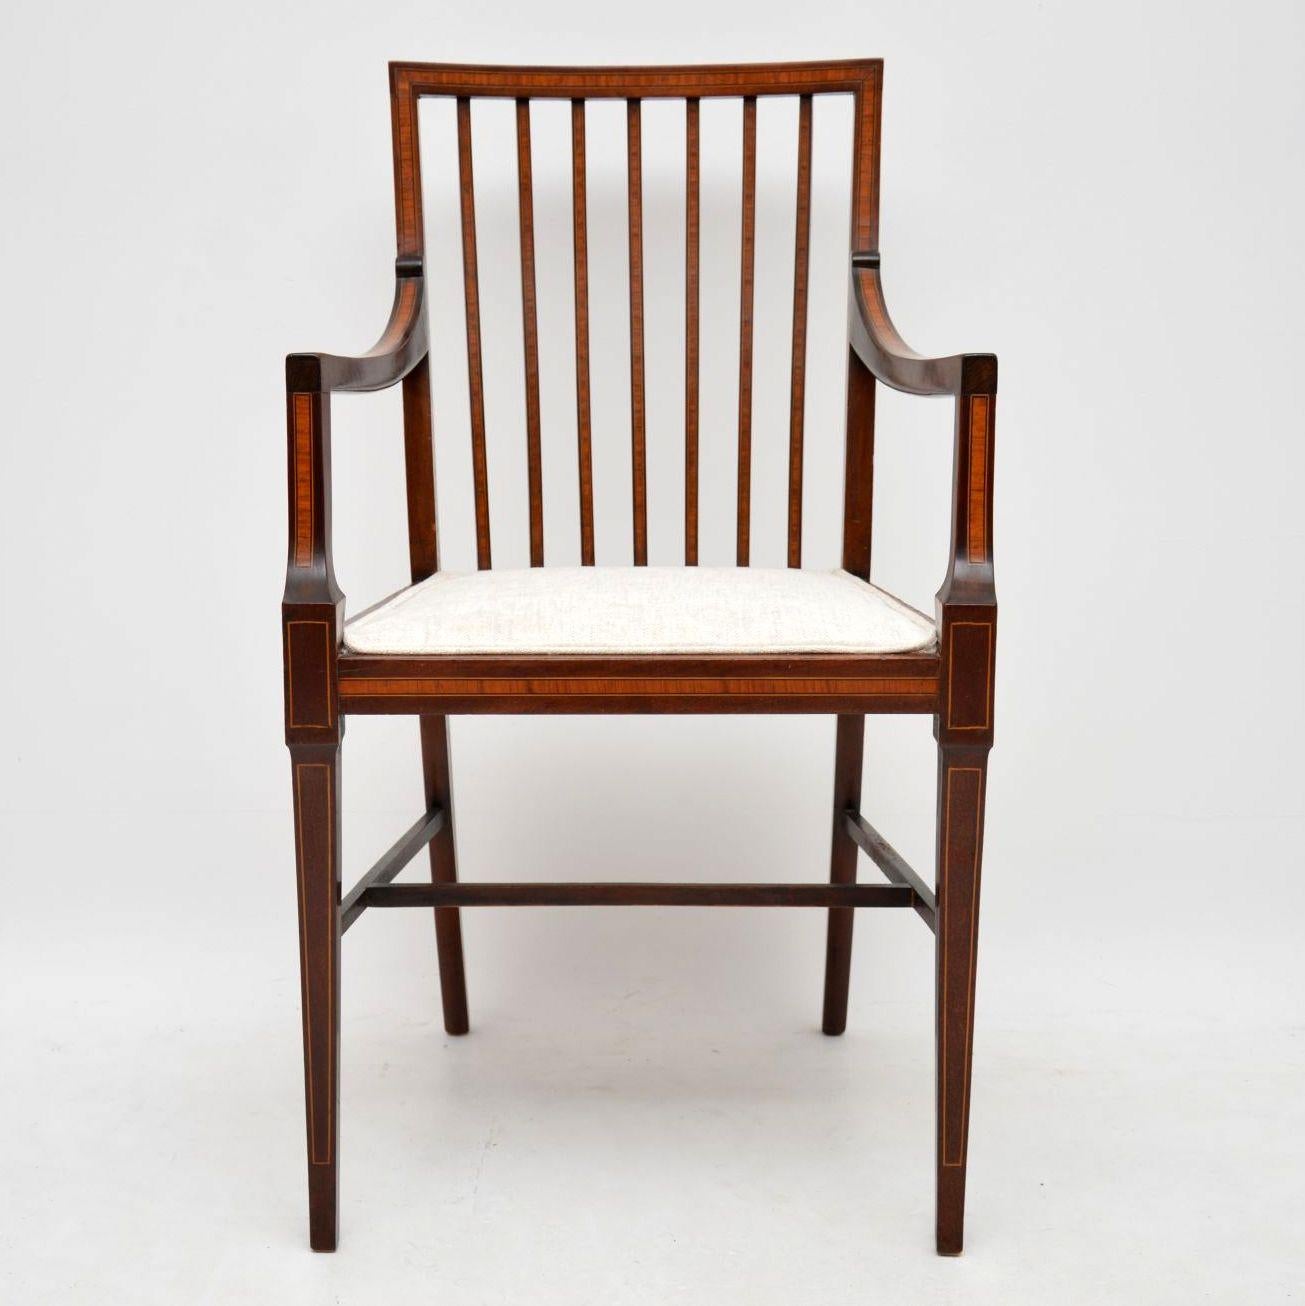 This fine quality elegant armchair has a high seat height so would be ideal as a desk chair. It's antique Edwardian and mahogany with satinwood inlaid bandings. The satinwood inlays are in many places, all over the back, arms, legs, across the seat